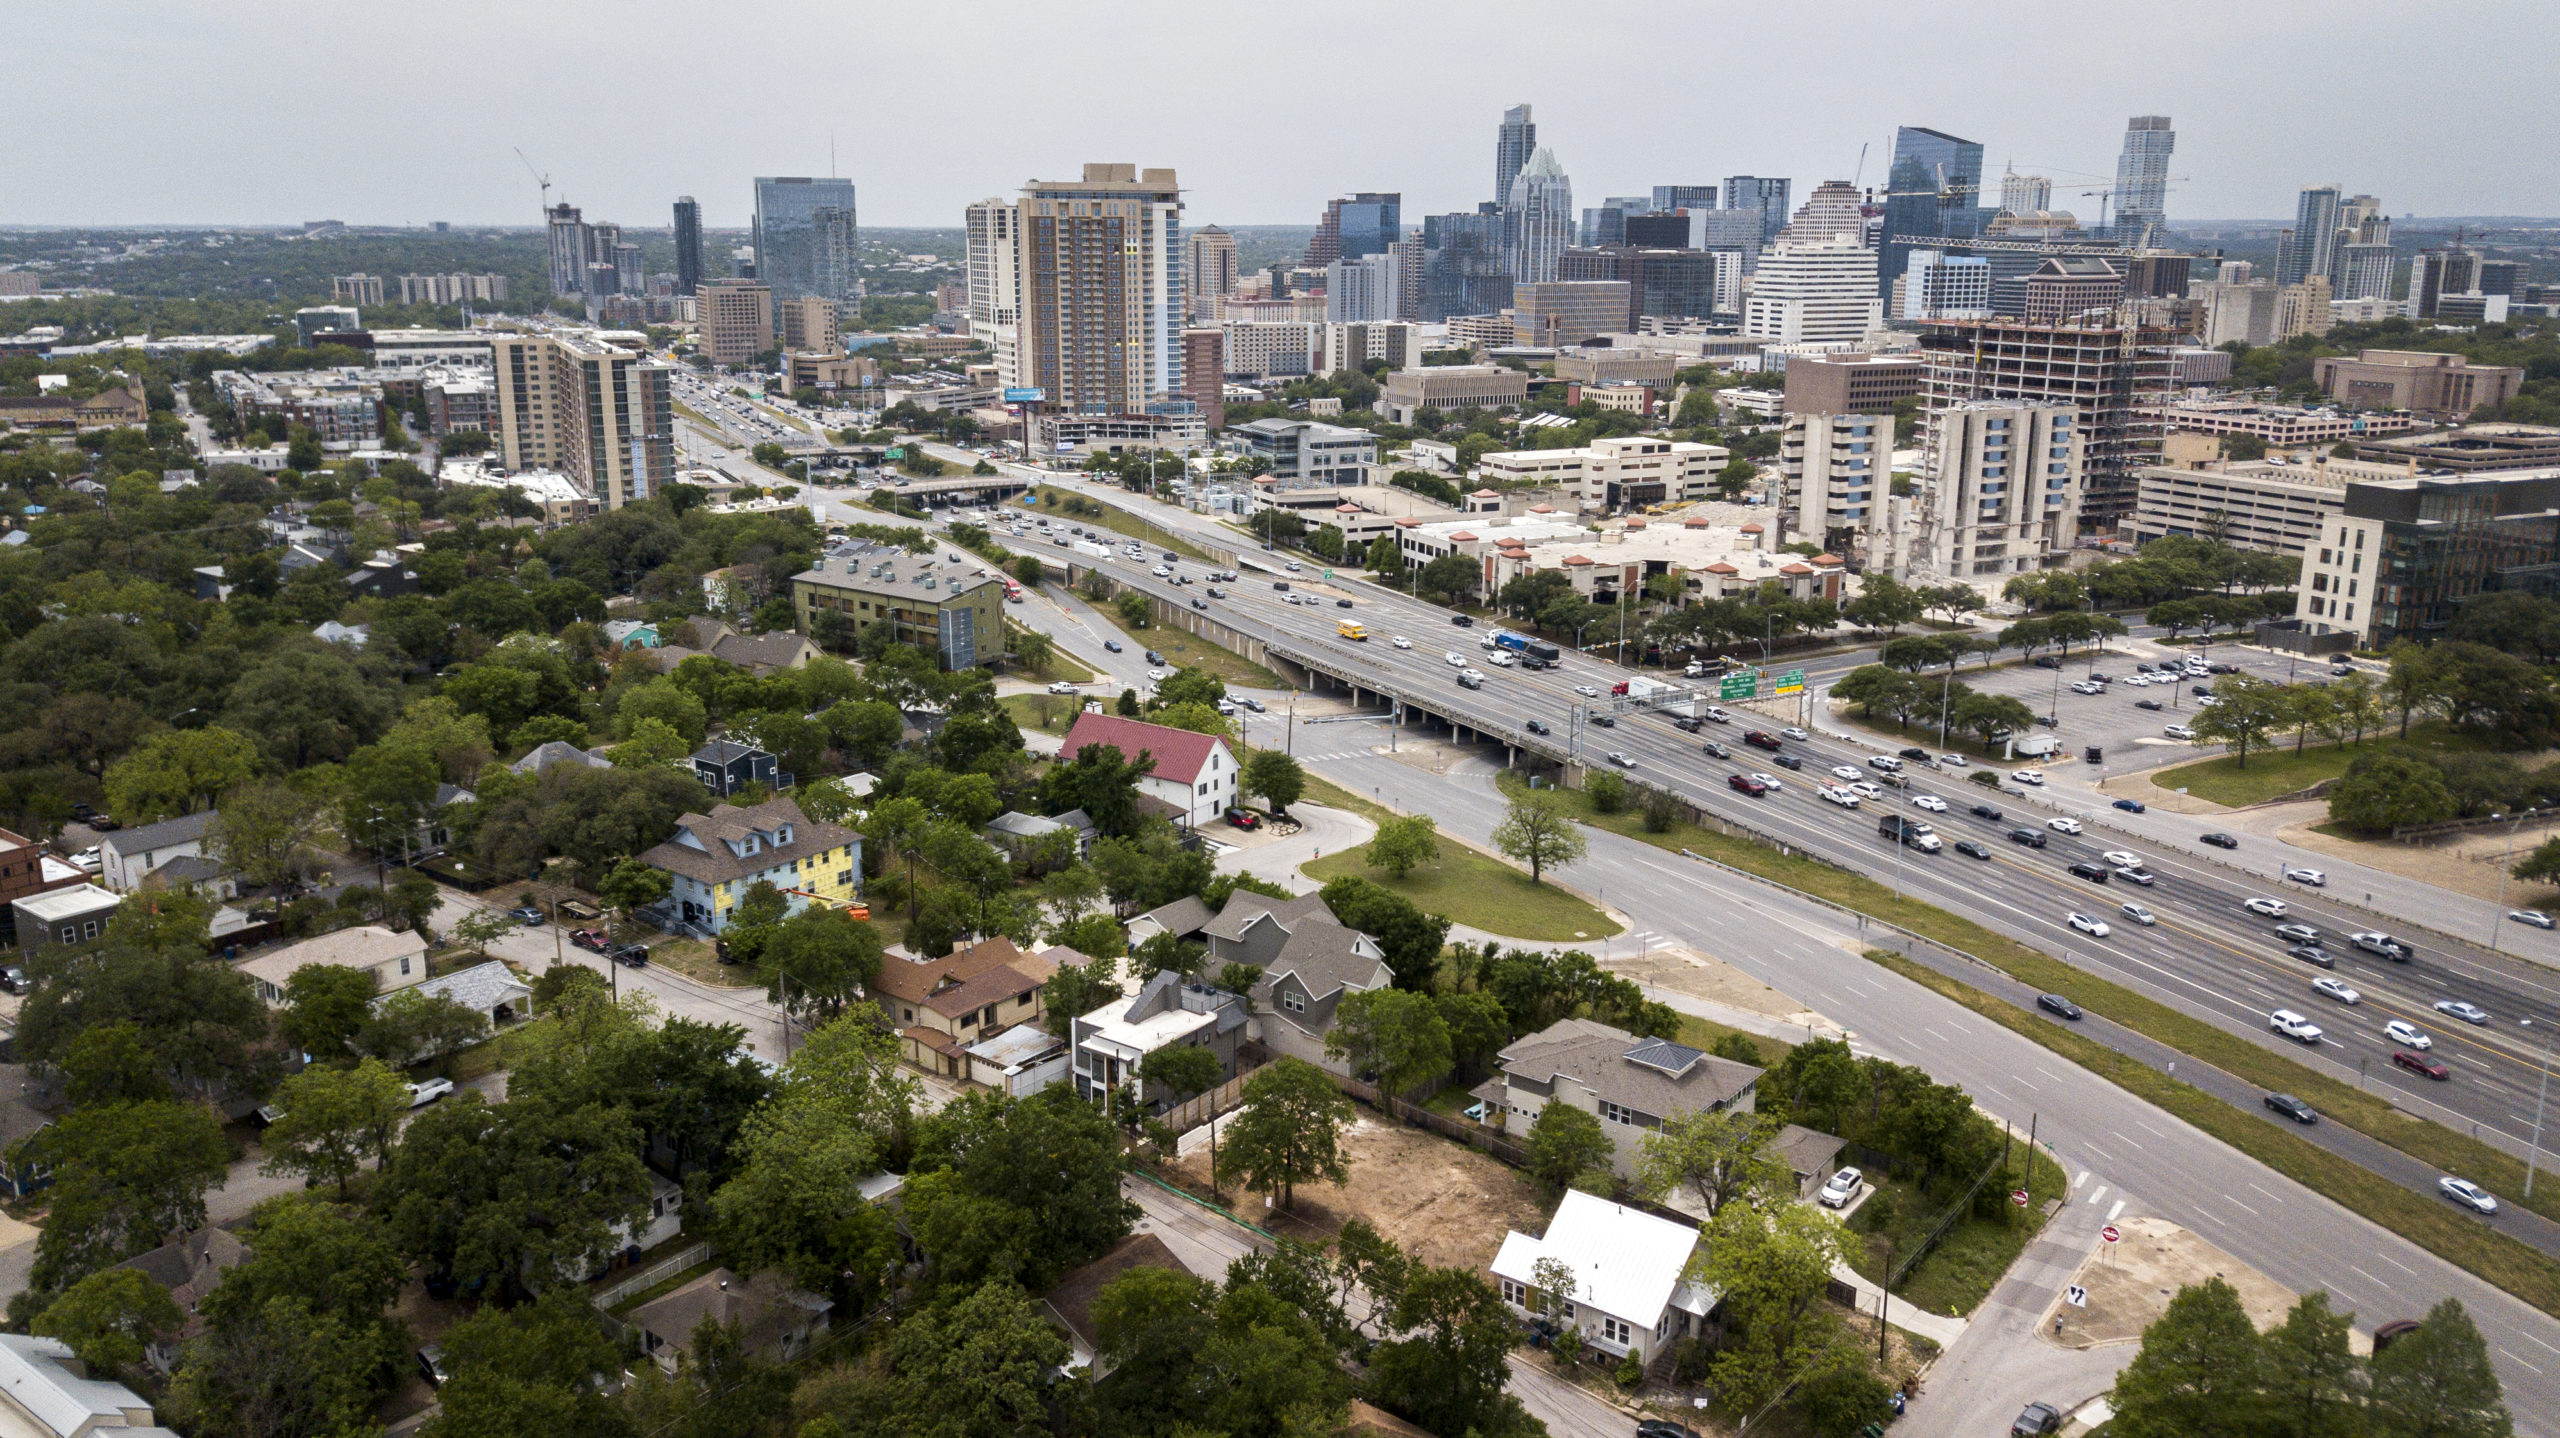 Highway to sprawl: How I-35 shapes where people live in Austin